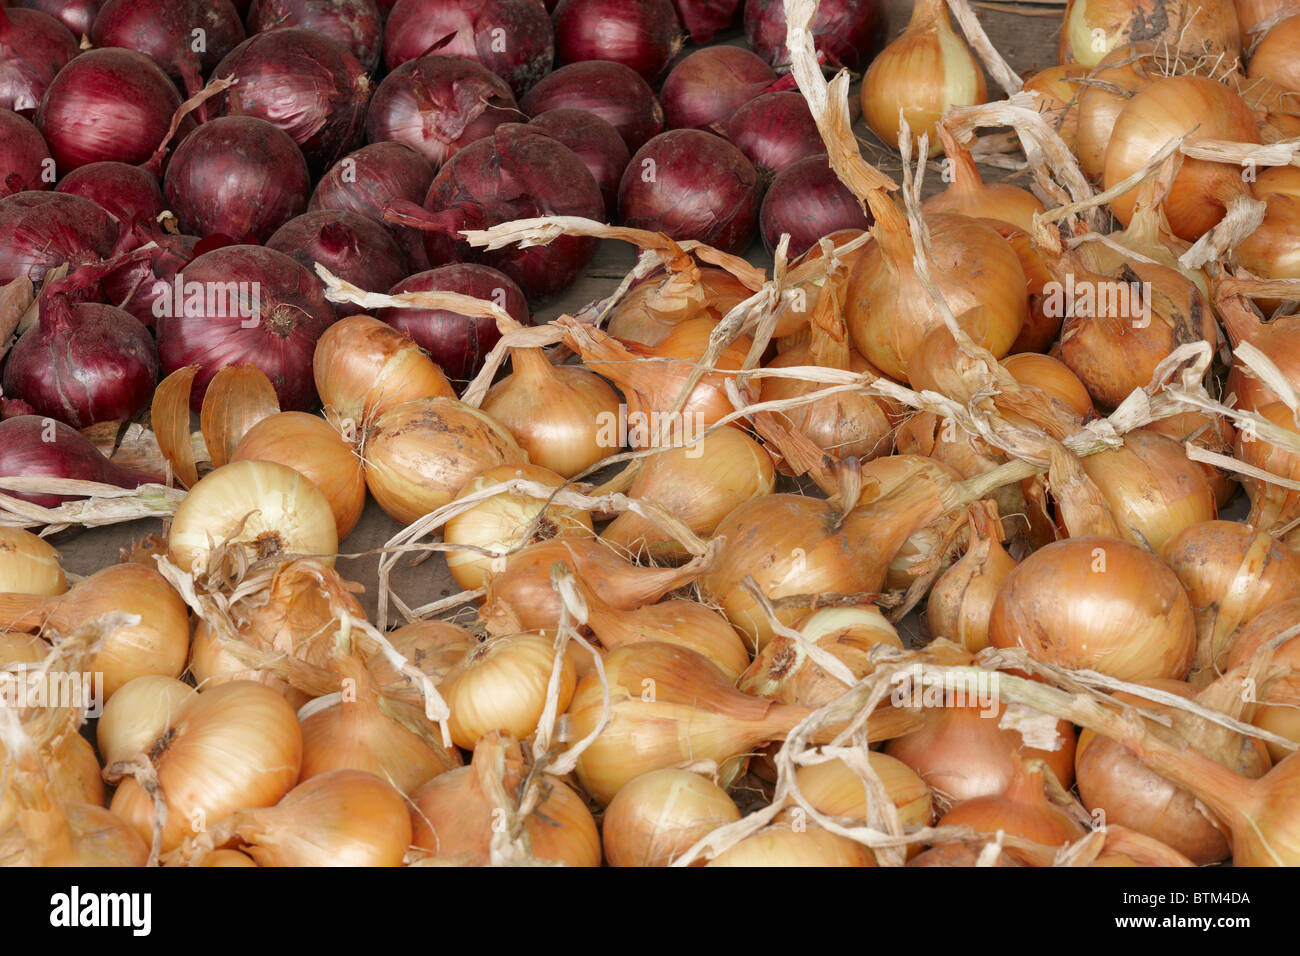 Organically grown yellow and red onions. Scientific name: Allium cepa. Stock Photo